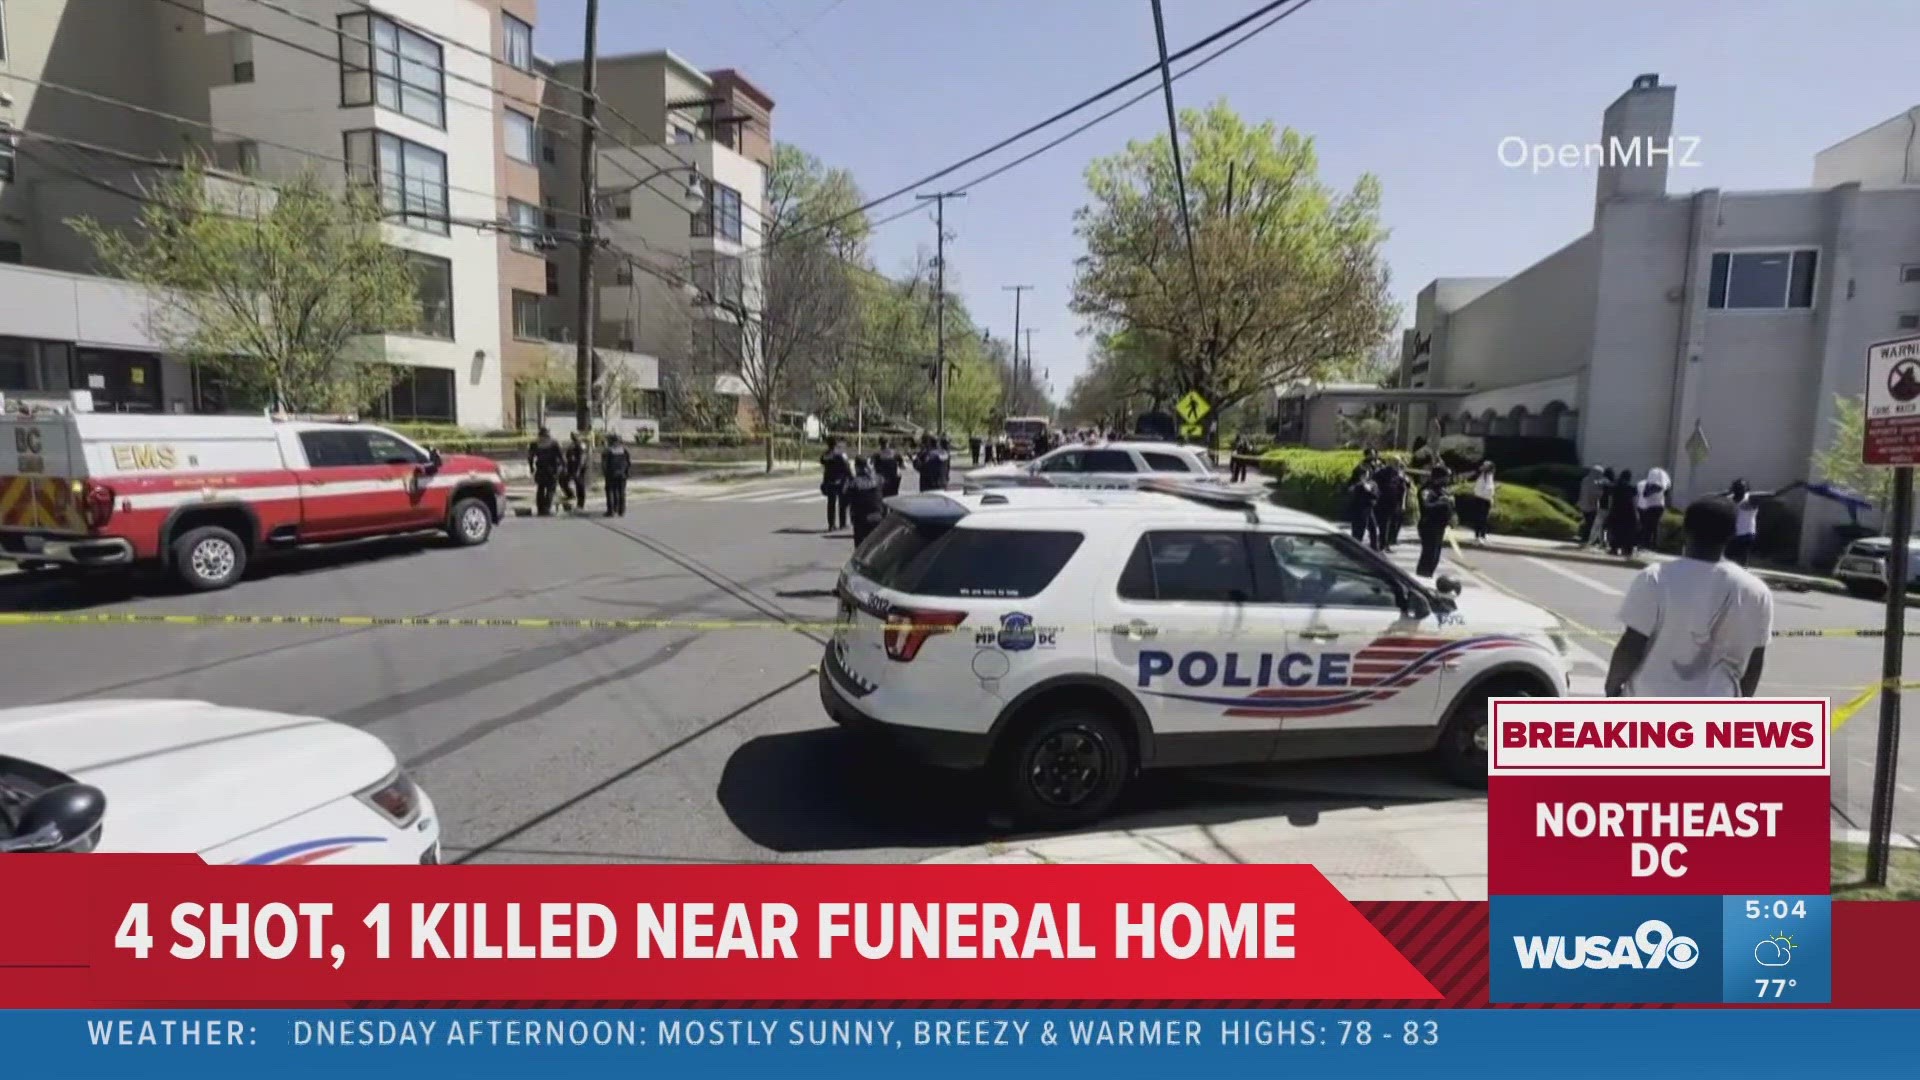 According to the Metropolitan Police Department, a funeral in the 4000 block of Benning Road was just letting out when someone opened fire on the mourners.